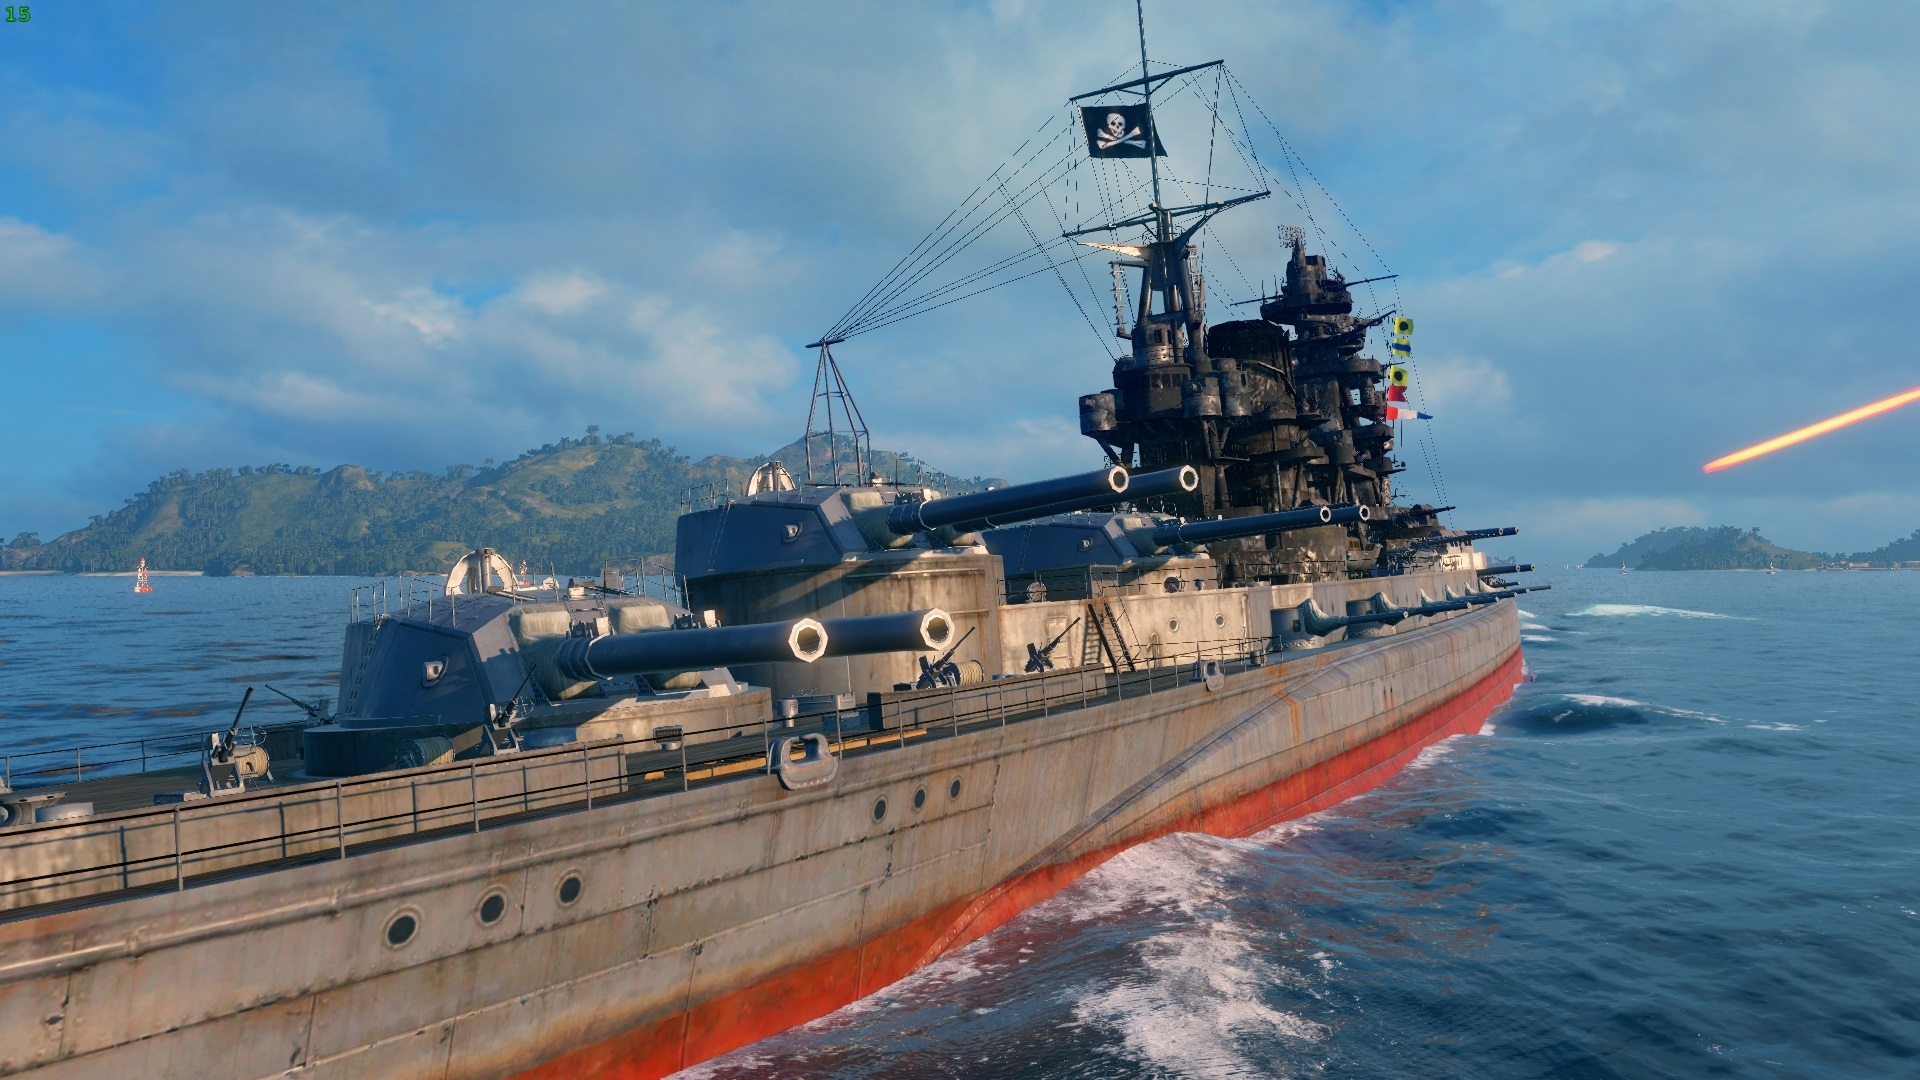 world of warships how to aim angled